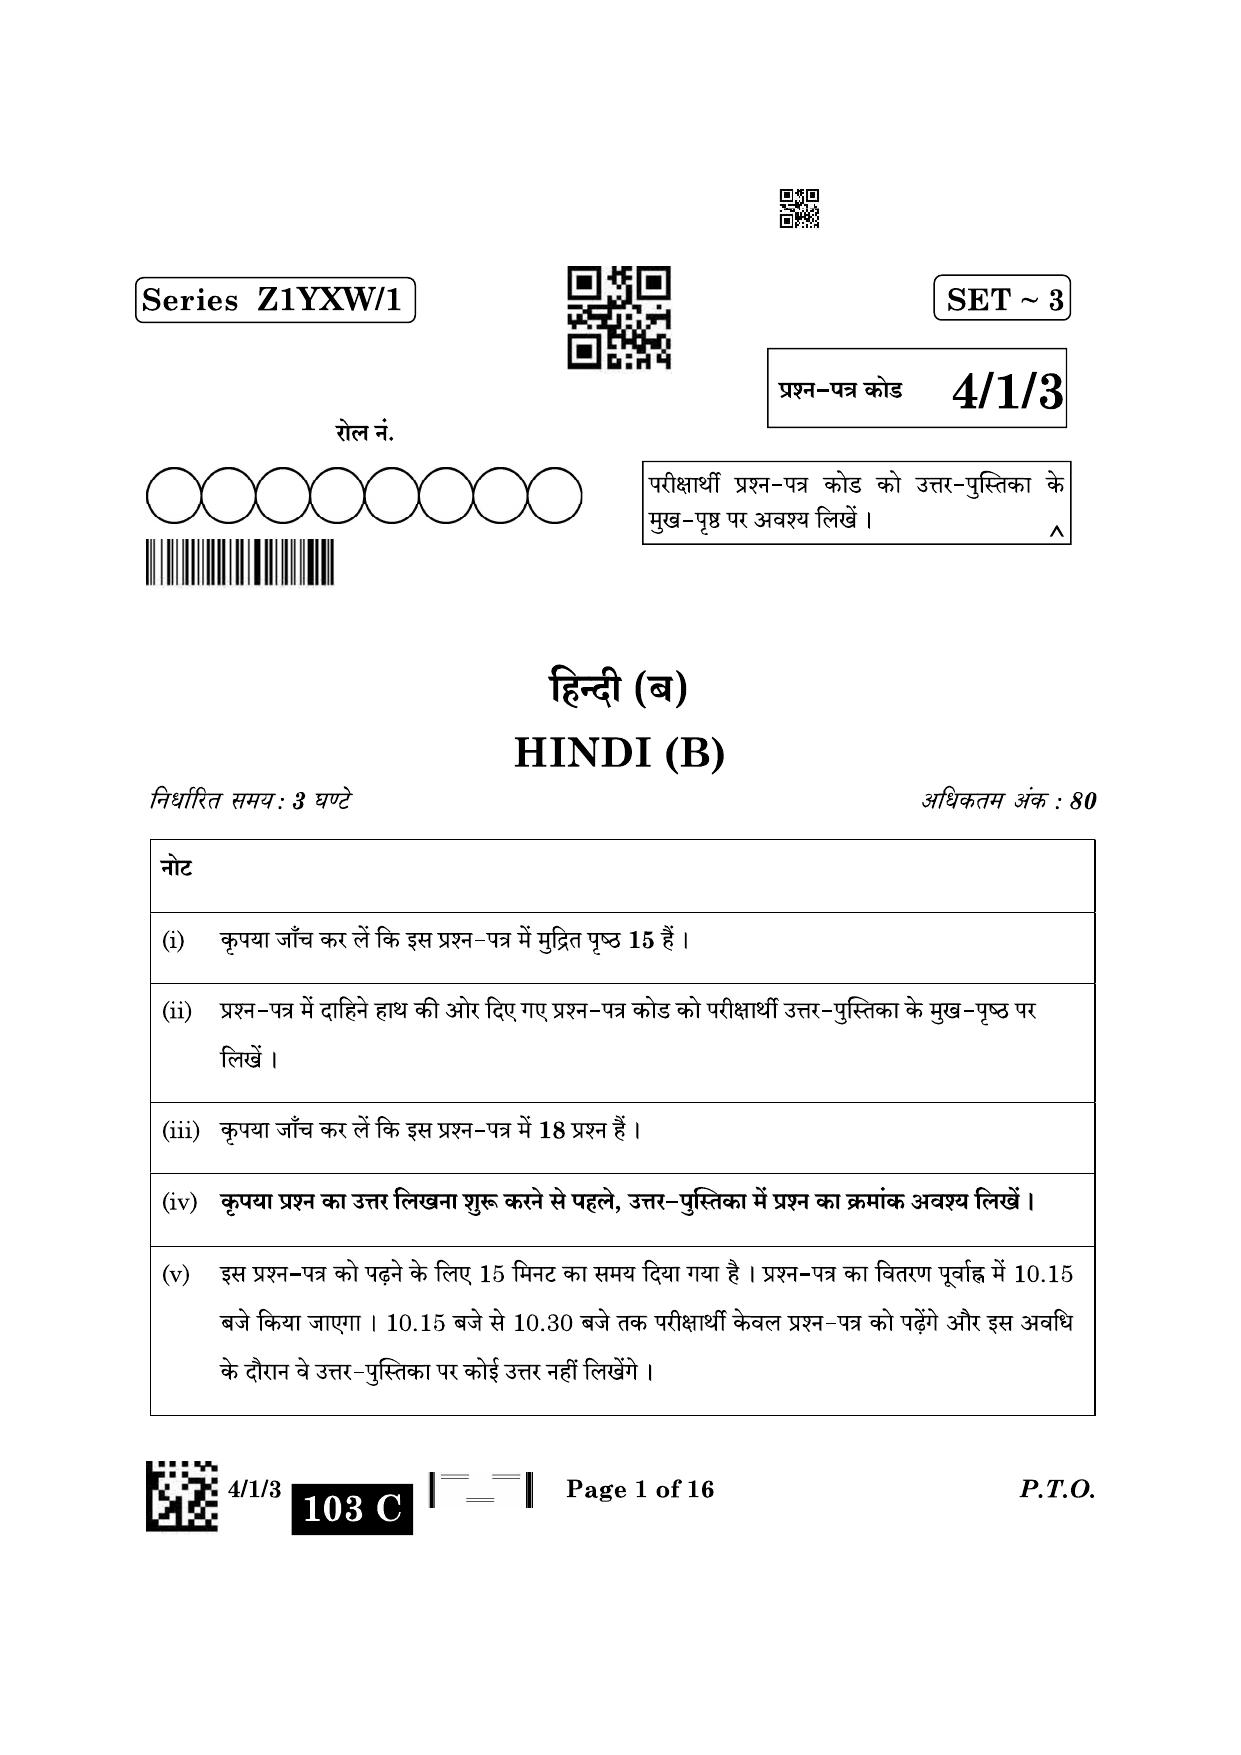 CBSE Class 10 4-1-3 Hindi B 2023 Question Paper - Page 1